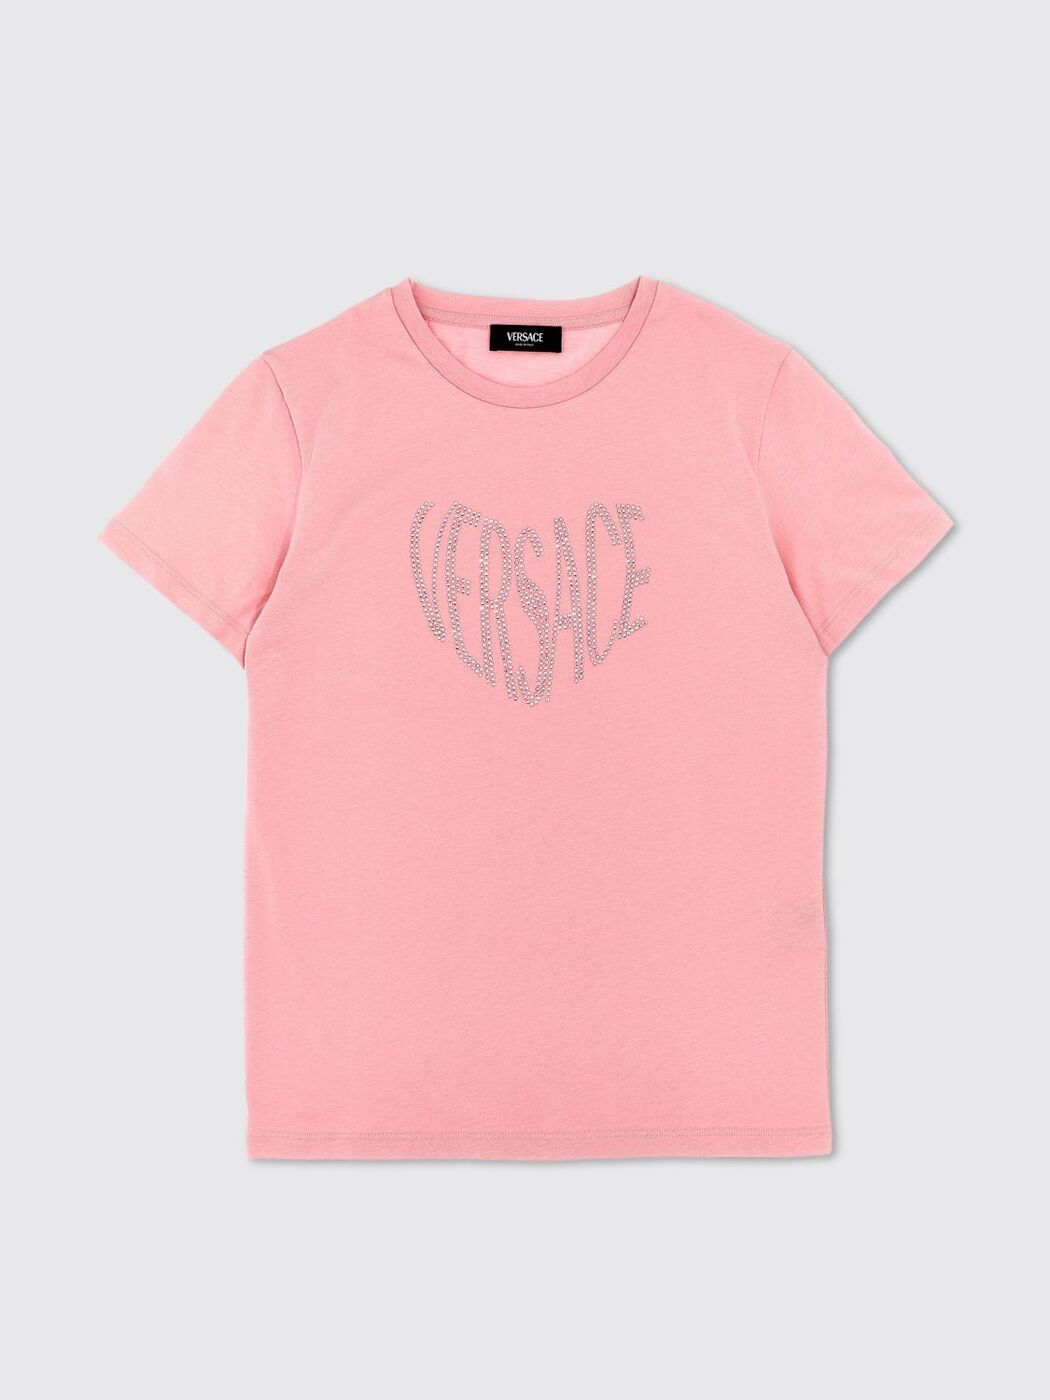  YOUNG VERSACE ヤングヴェルサーチ ピンク Pink Tシャツ ガールズ 春夏2024 10000521A09709  gi